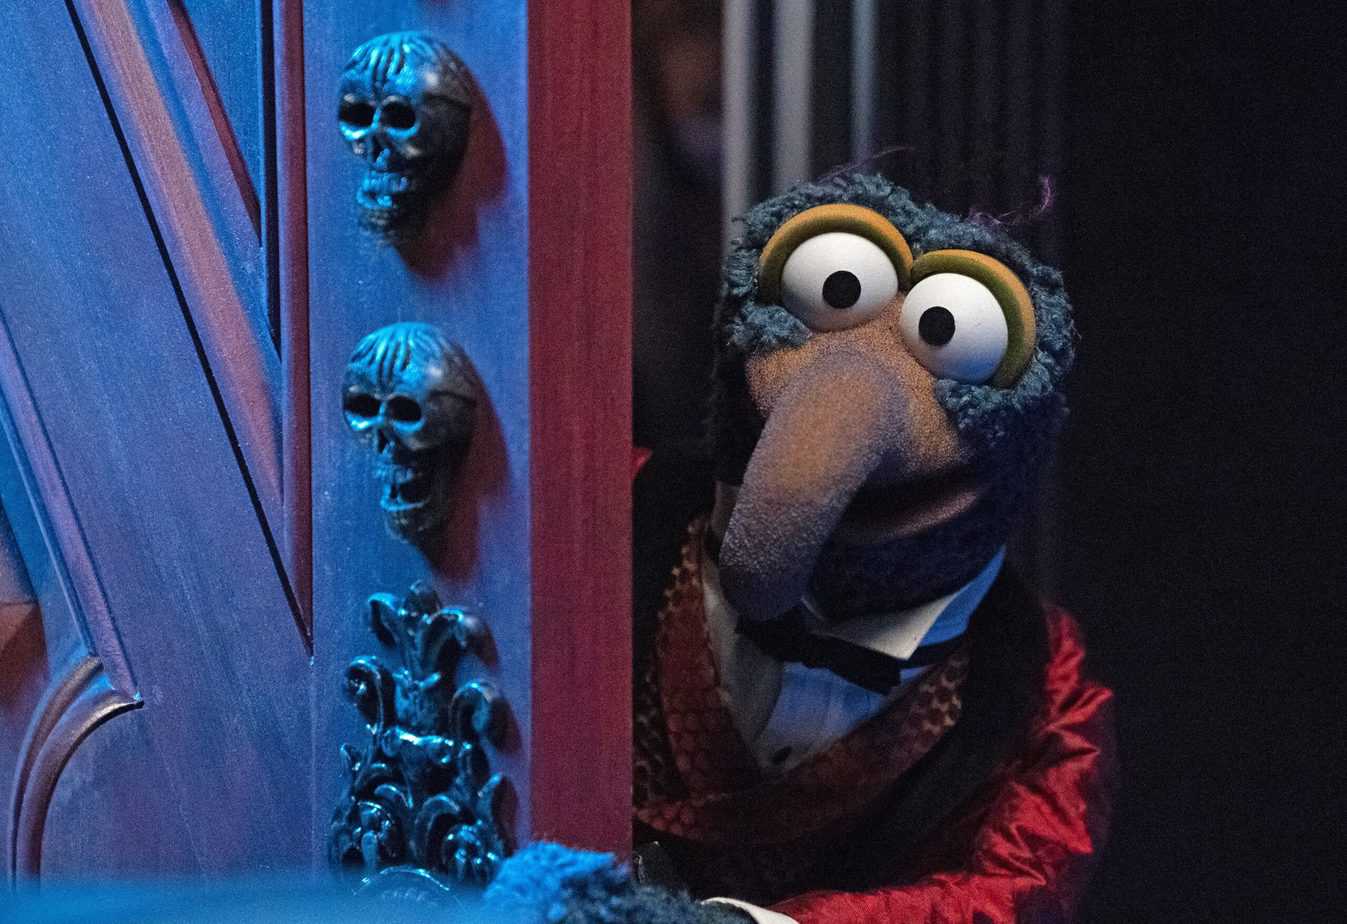 is Muppets Haunted Mansion Too Scary for Kids? parent movie review